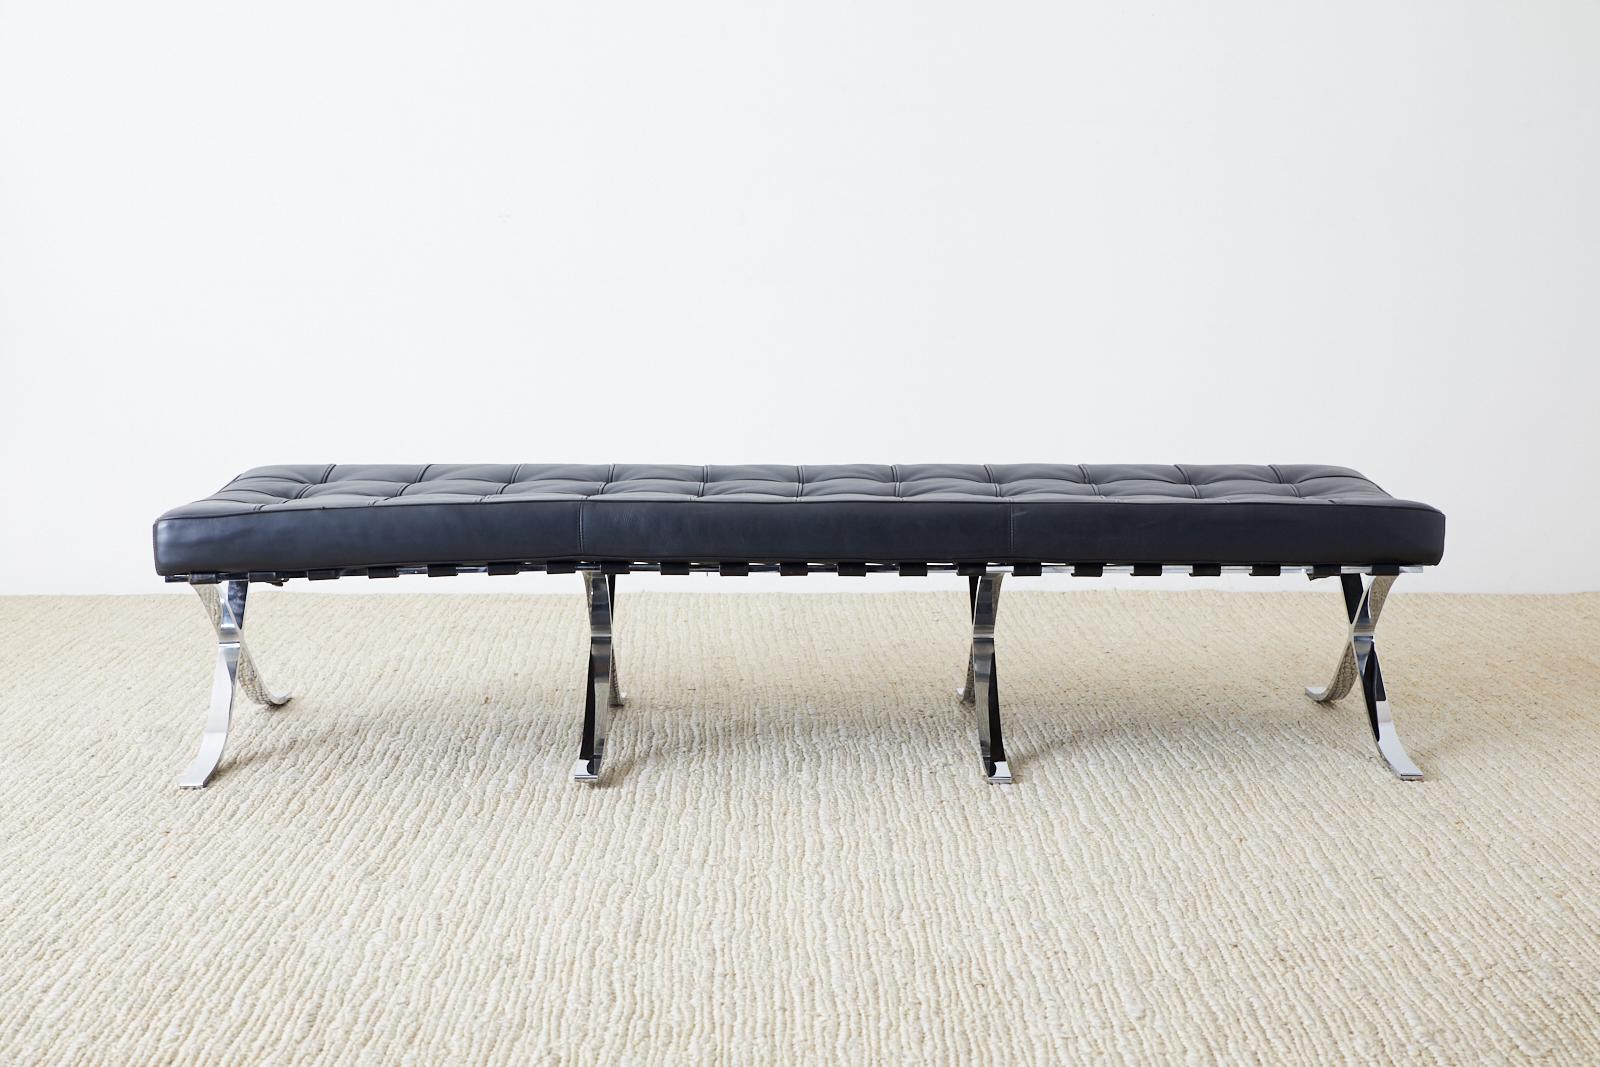 Polished Midcentury Barcelona Style Bench after Mies van der Rohe